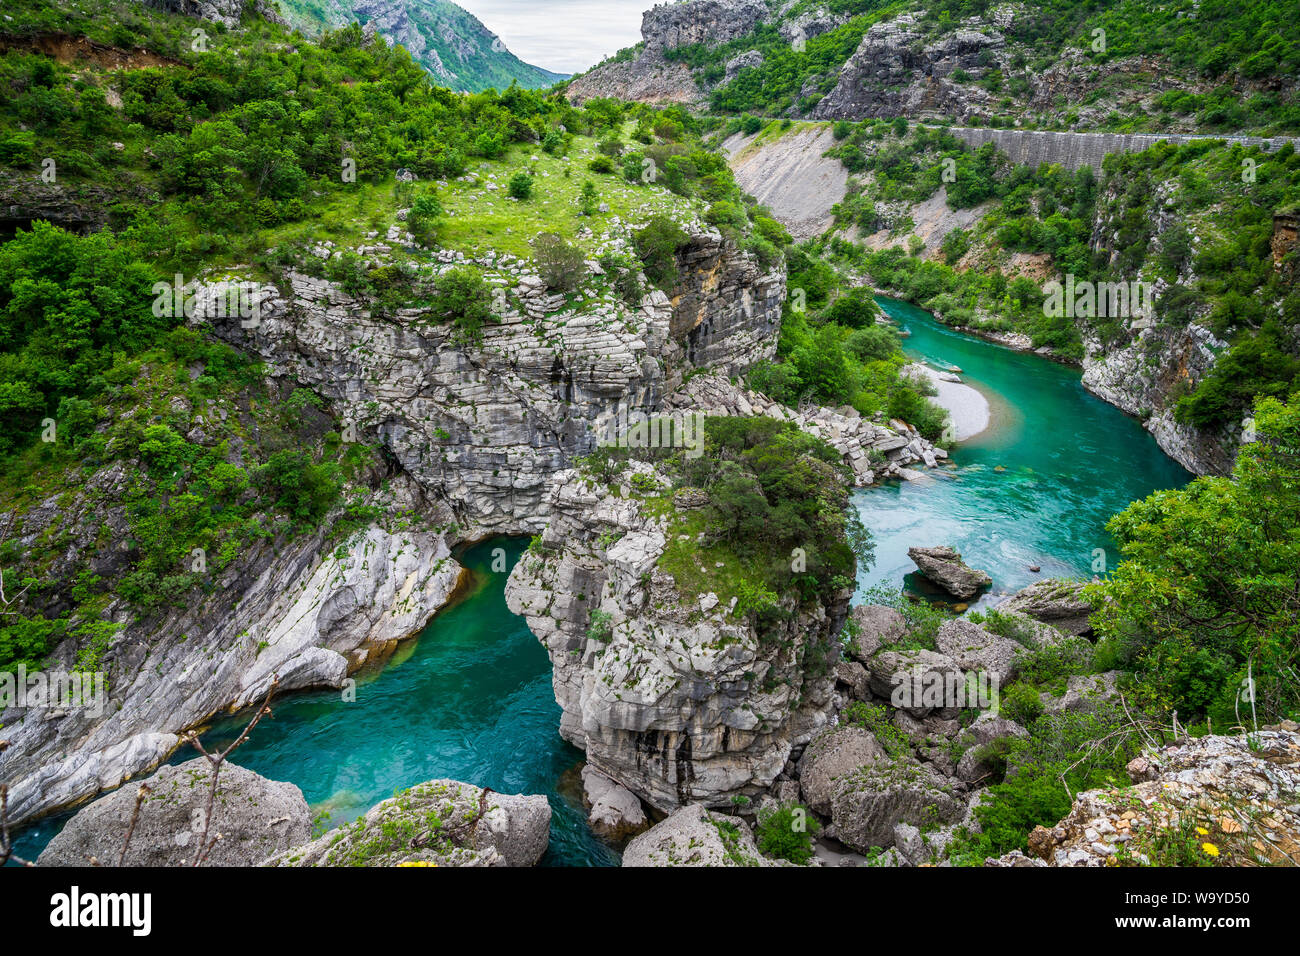 Montenegro, Beautiful unspoiled turquoise waters of moraca river course through plain nature landscape Stock Photo - Alamy